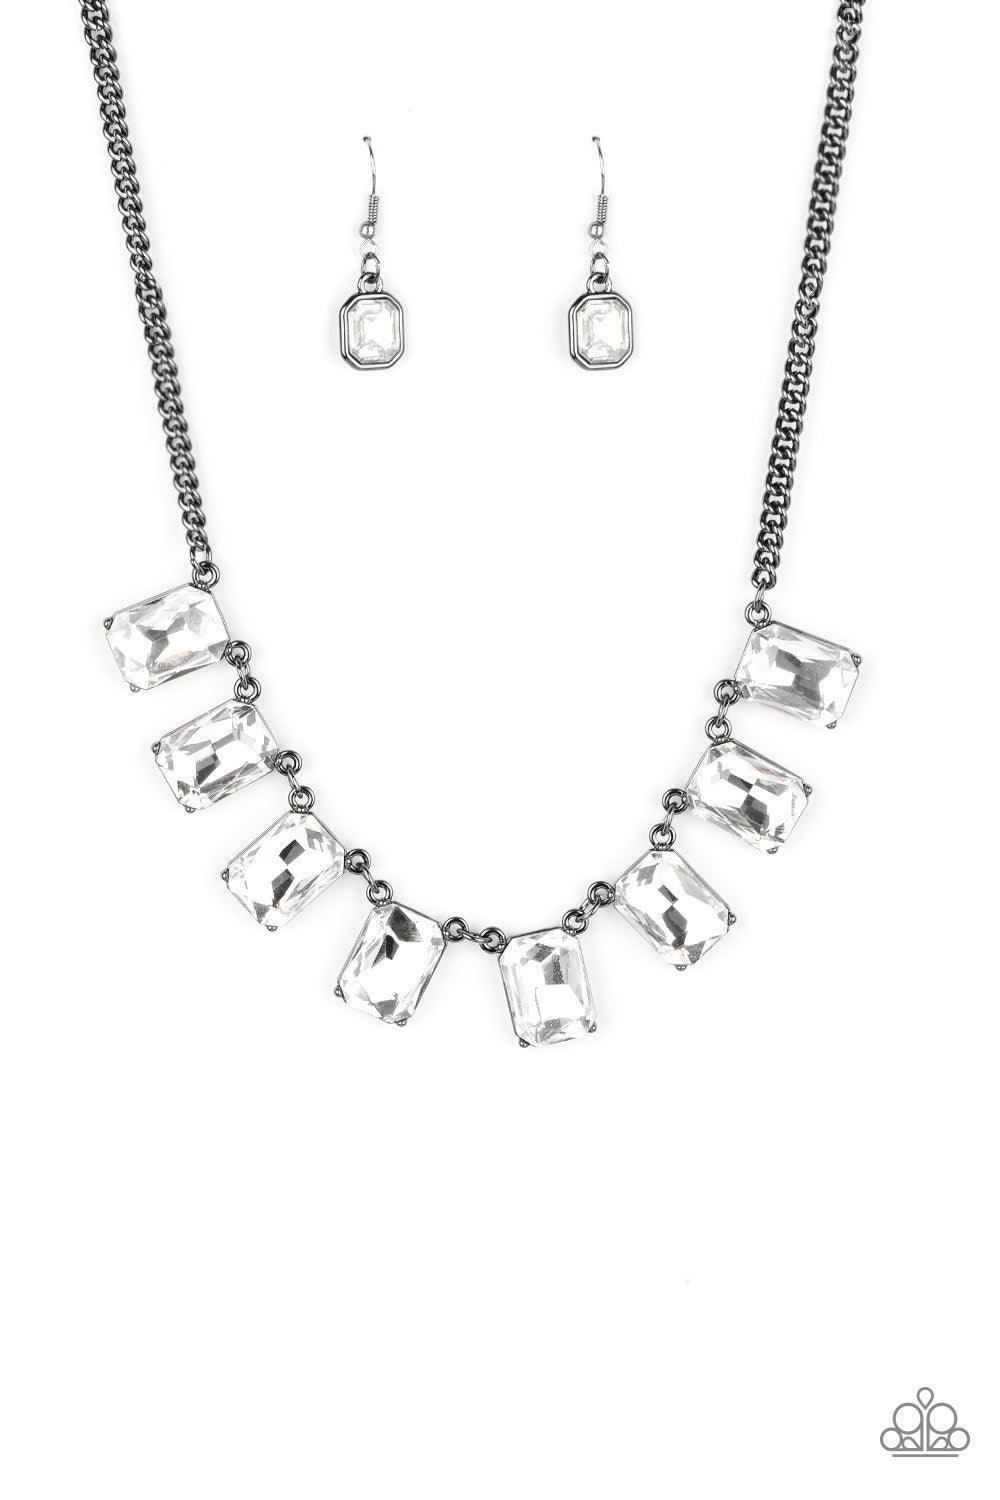 Paparazzi Accessories After Party Access - Black Encased in sleek gunmetal fittings, a regal chain of oversized white emerald style gems link below the collar for a timeless finish. Features an adjustable clasp closure. Sold as one individual necklace. In